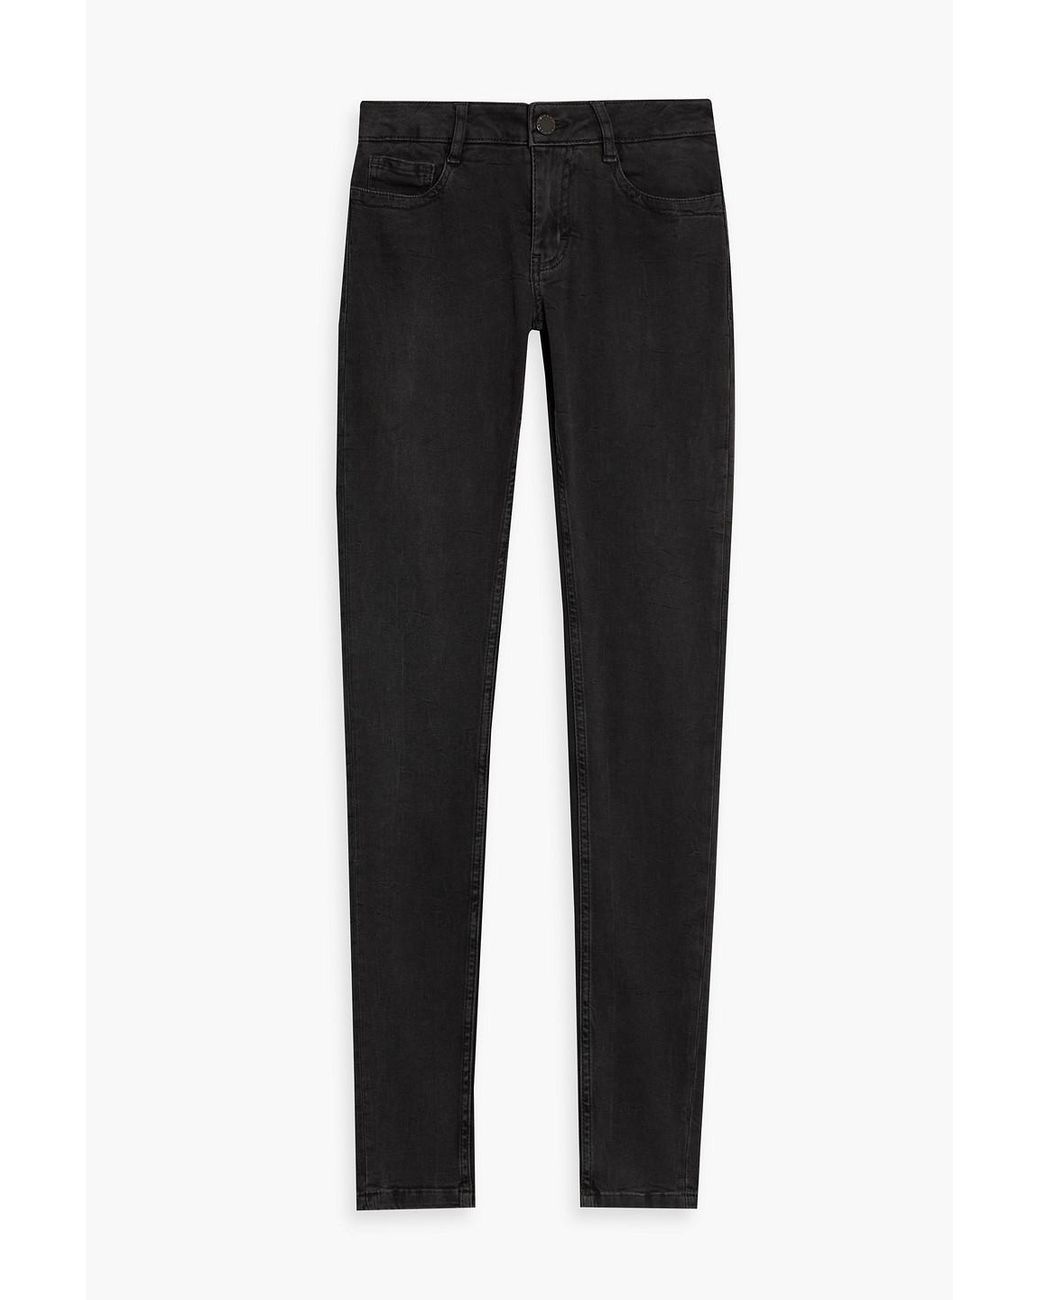 Maje Jaw Embroidered Low-rise Skinny Jeans in Black | Lyst